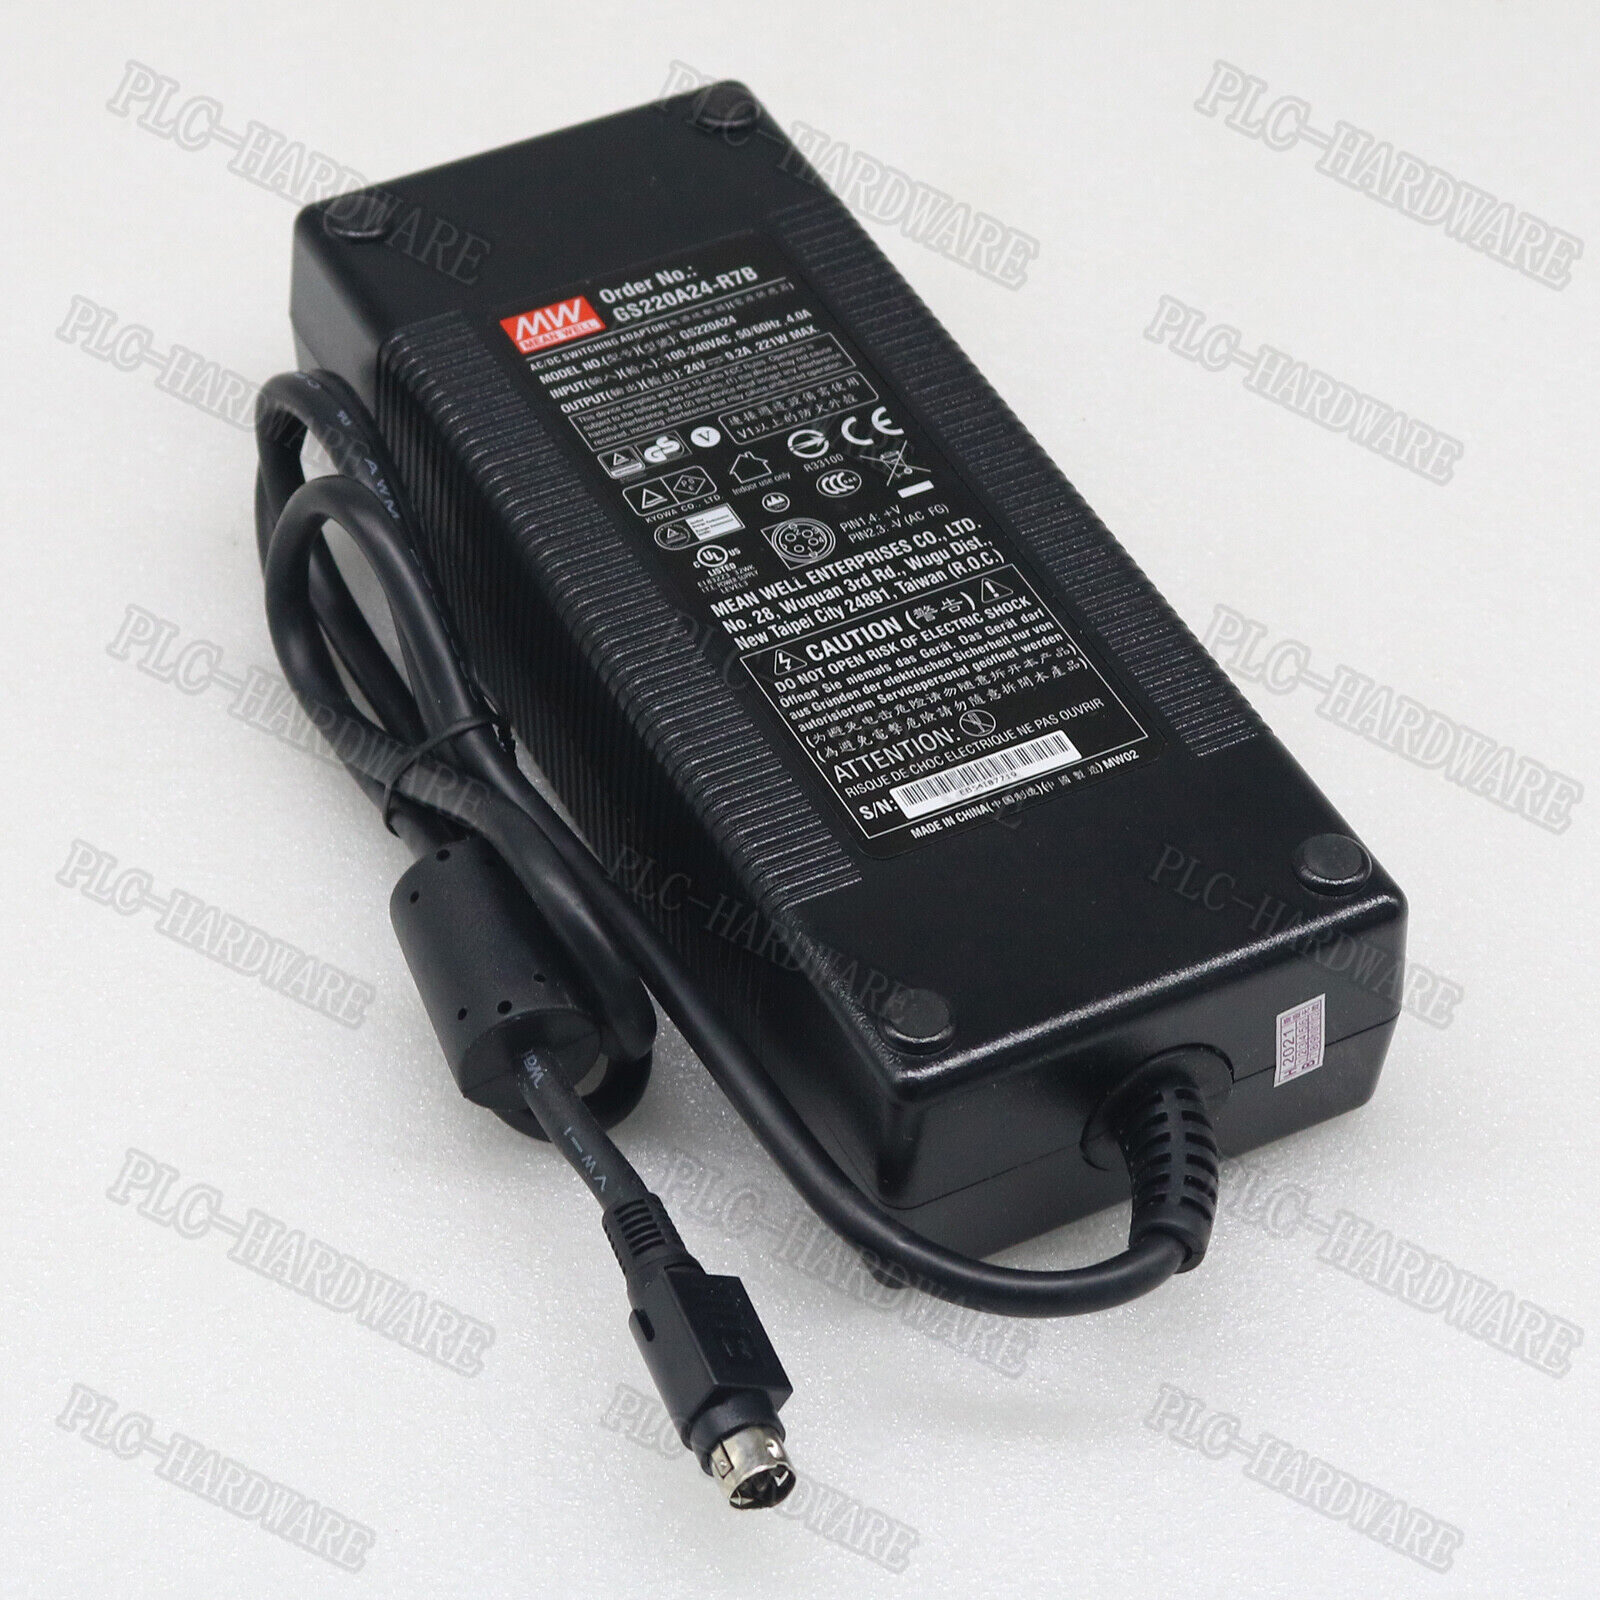 New GS220A24-R7B 24V 9.2A power supply For MEAN WELL Brand: MEAN WELL MPN: GS220A24-R7B Model: GS220A24-R7B UPC: D